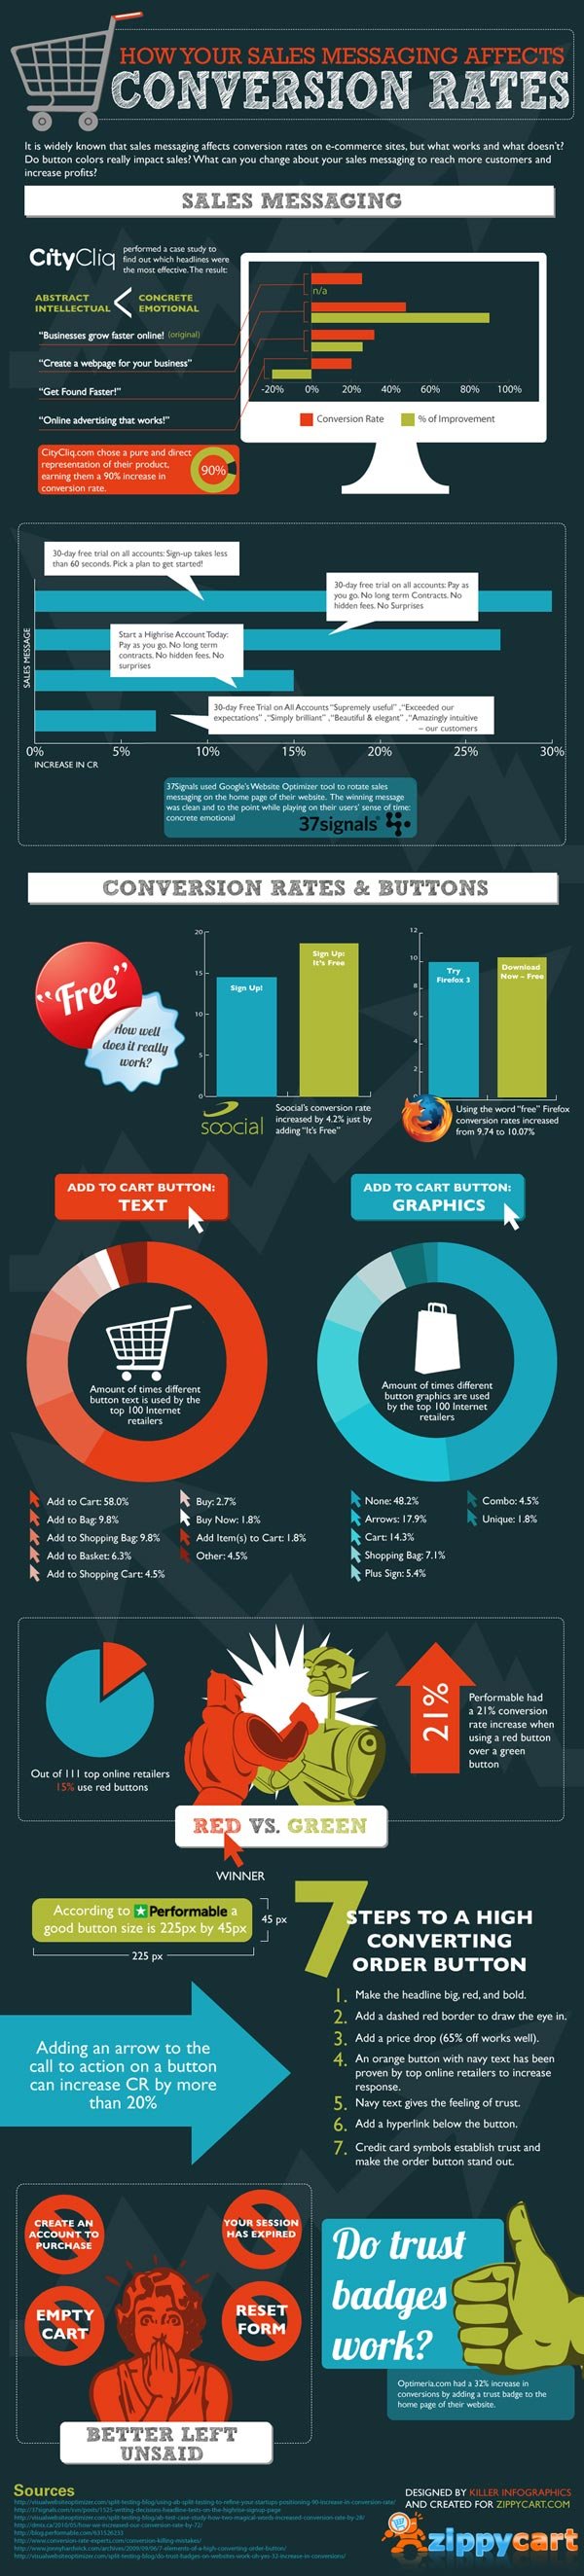 infographic - sales messaging conversion rates 